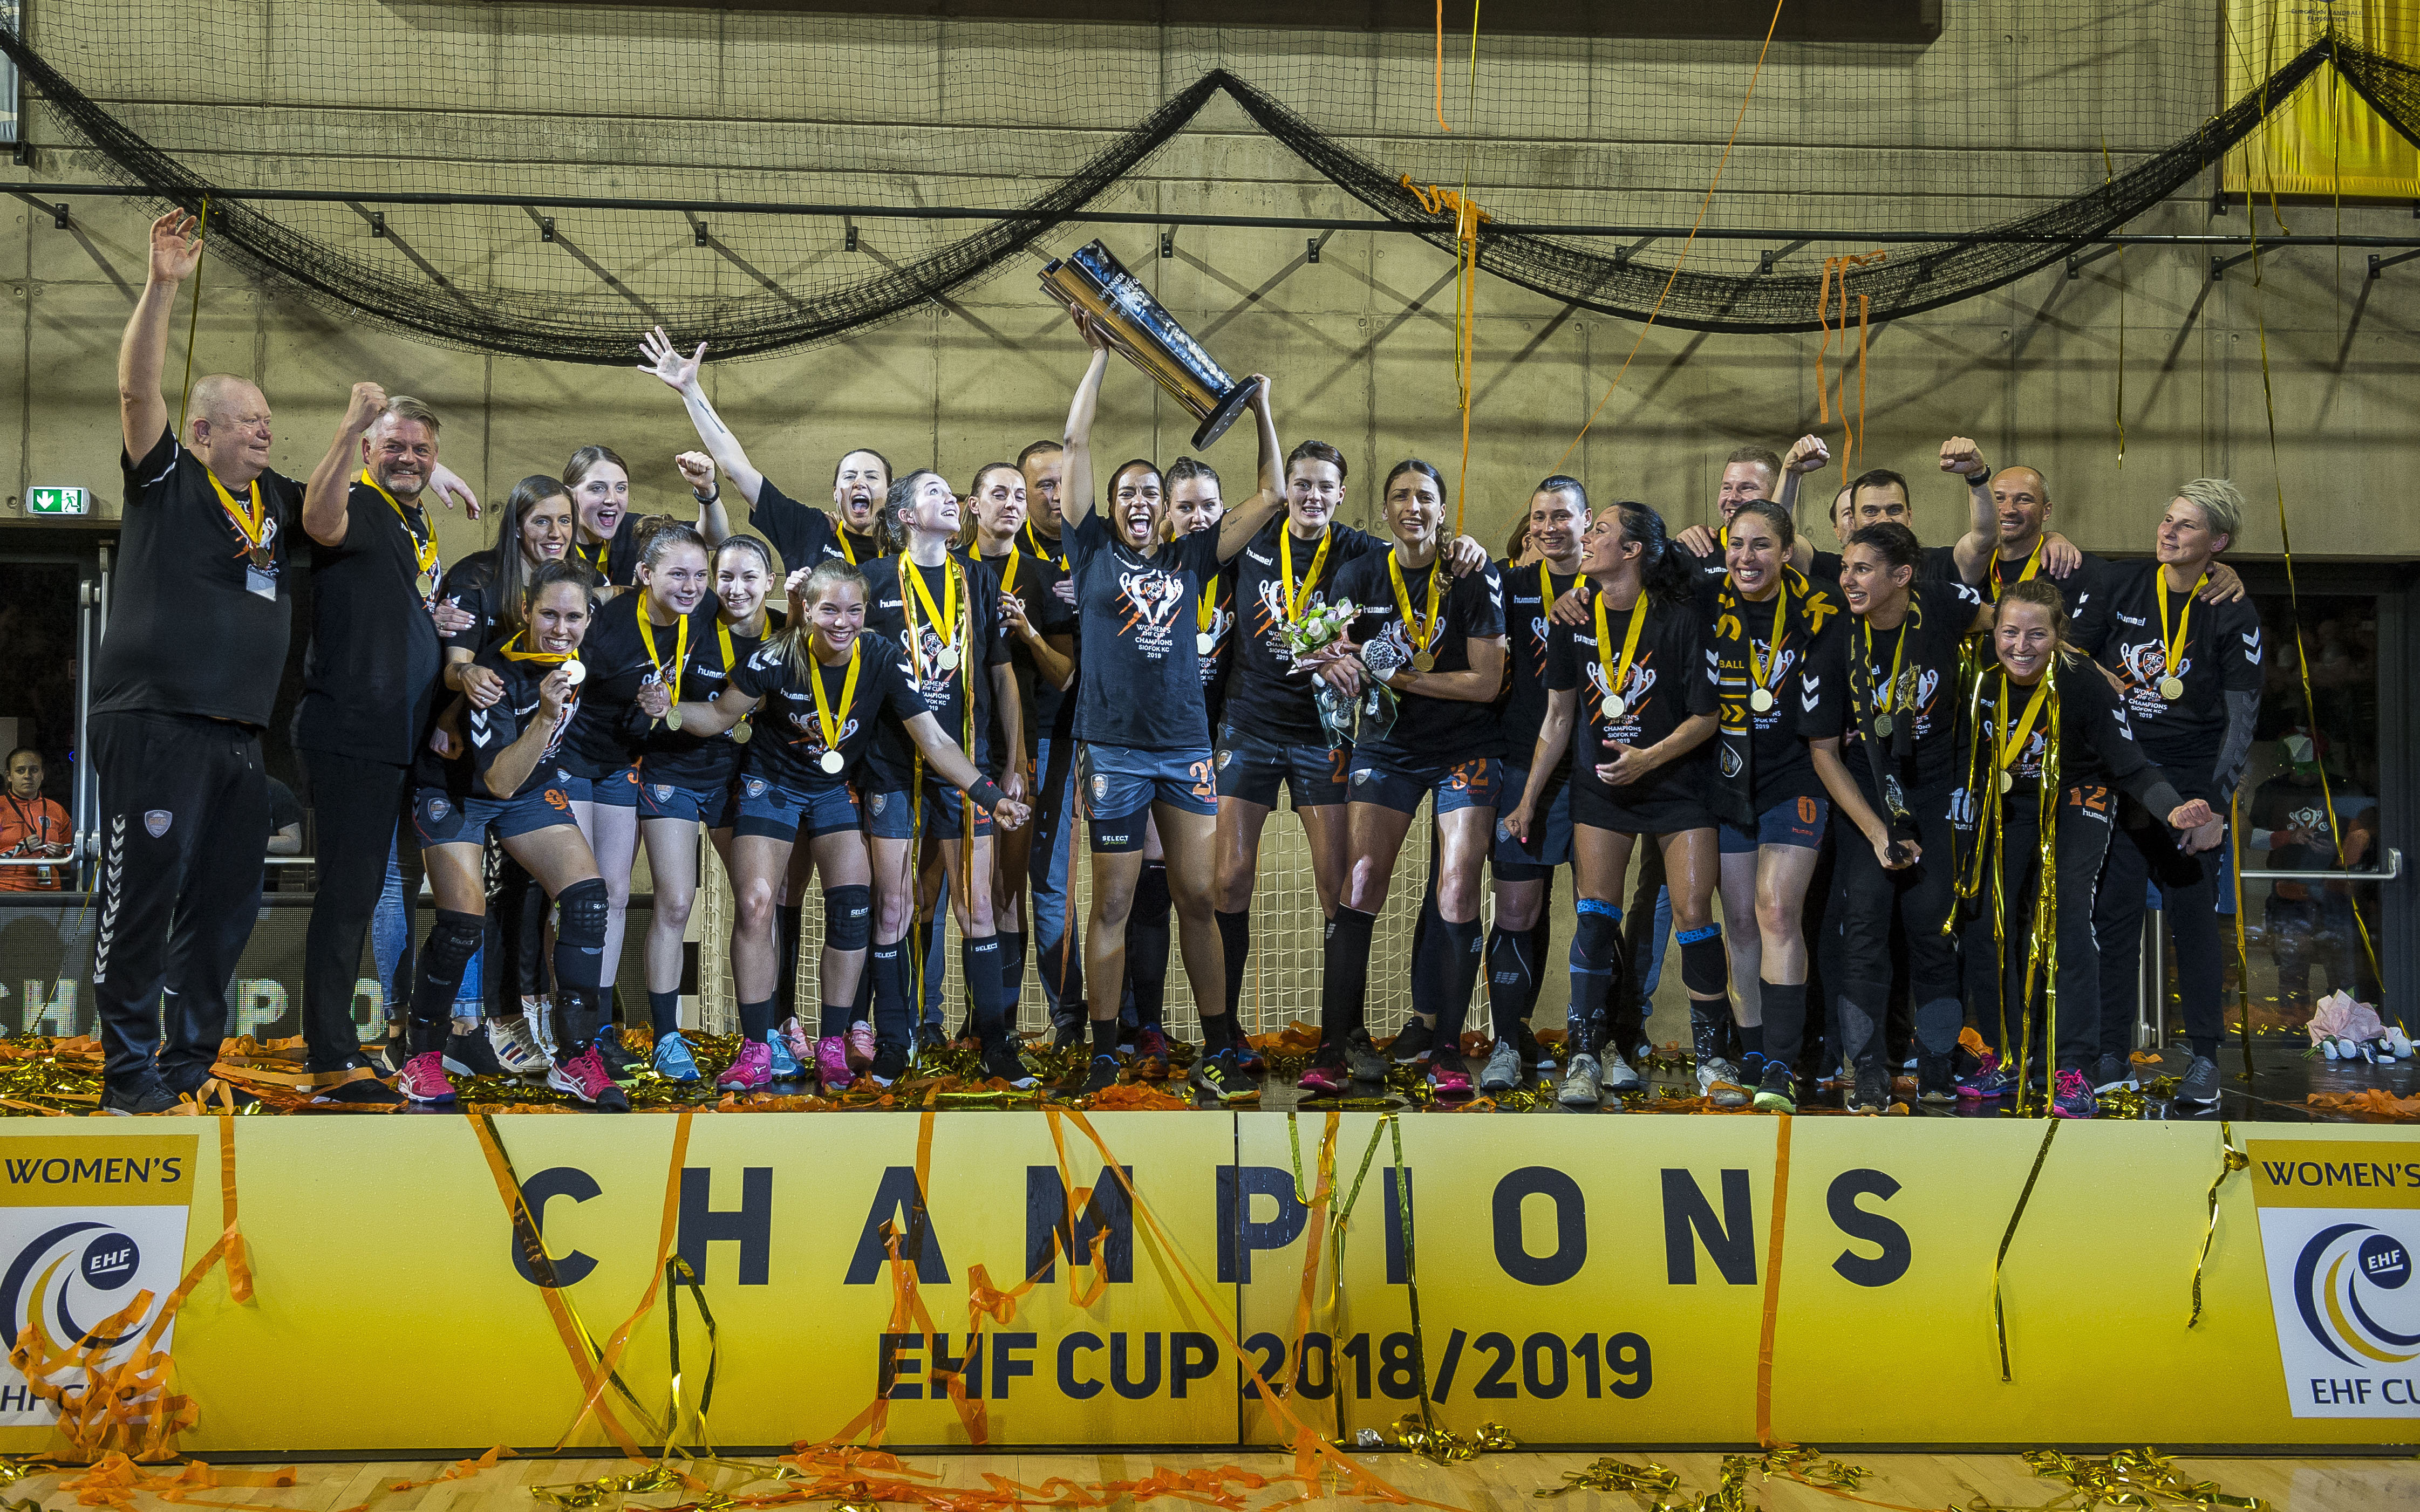 Siófok win women's EHF CUP for club's first title!